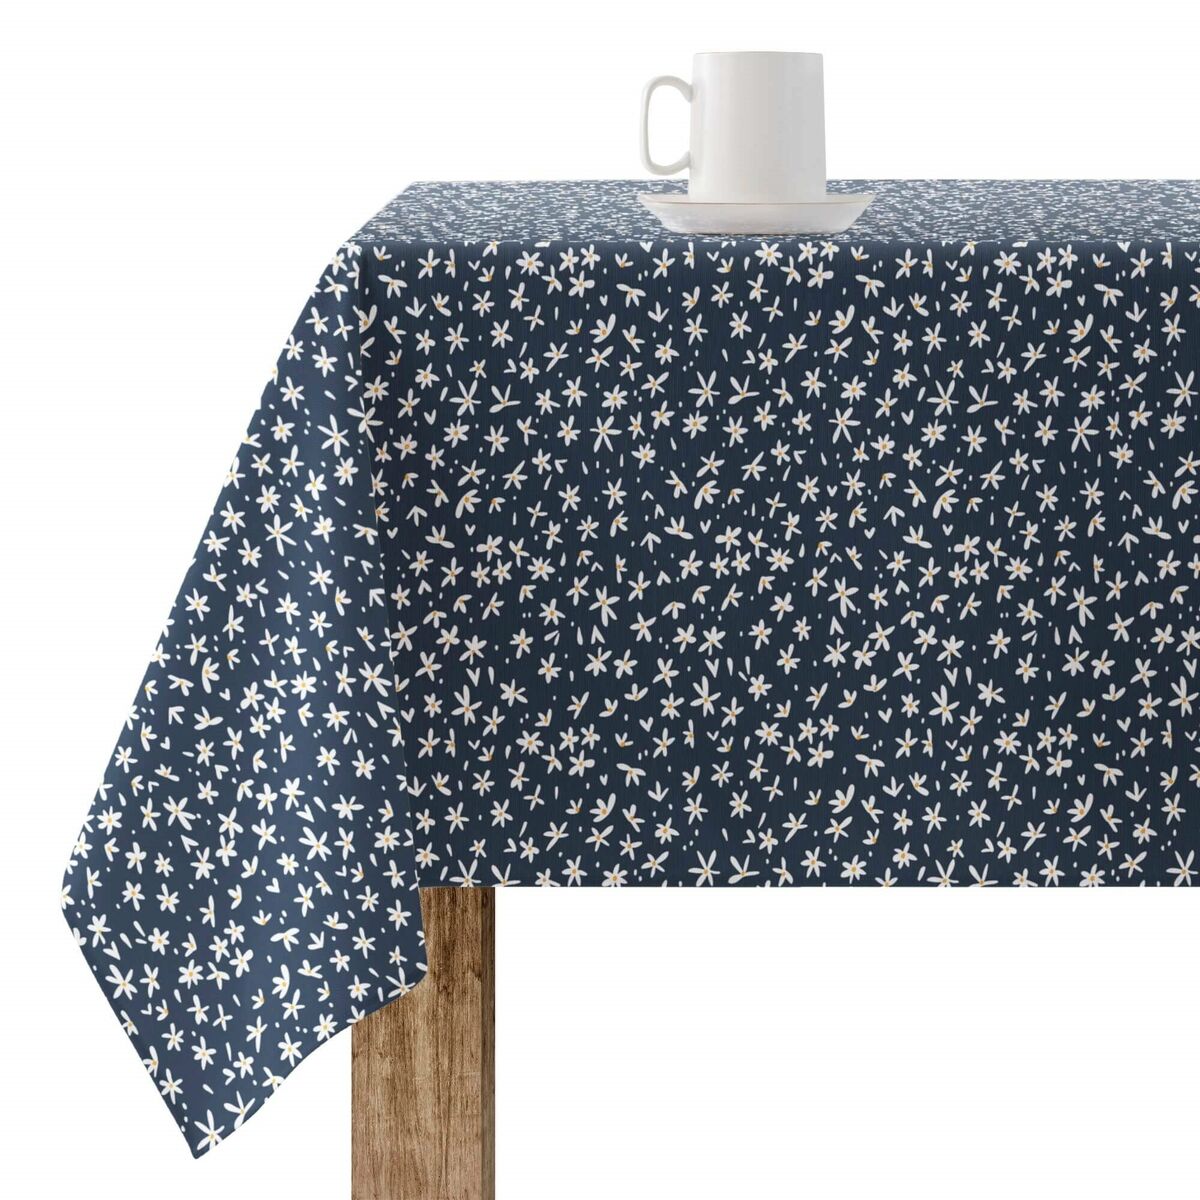 Stain-proof tablecloth Belum 220-39 300 x 140 cm